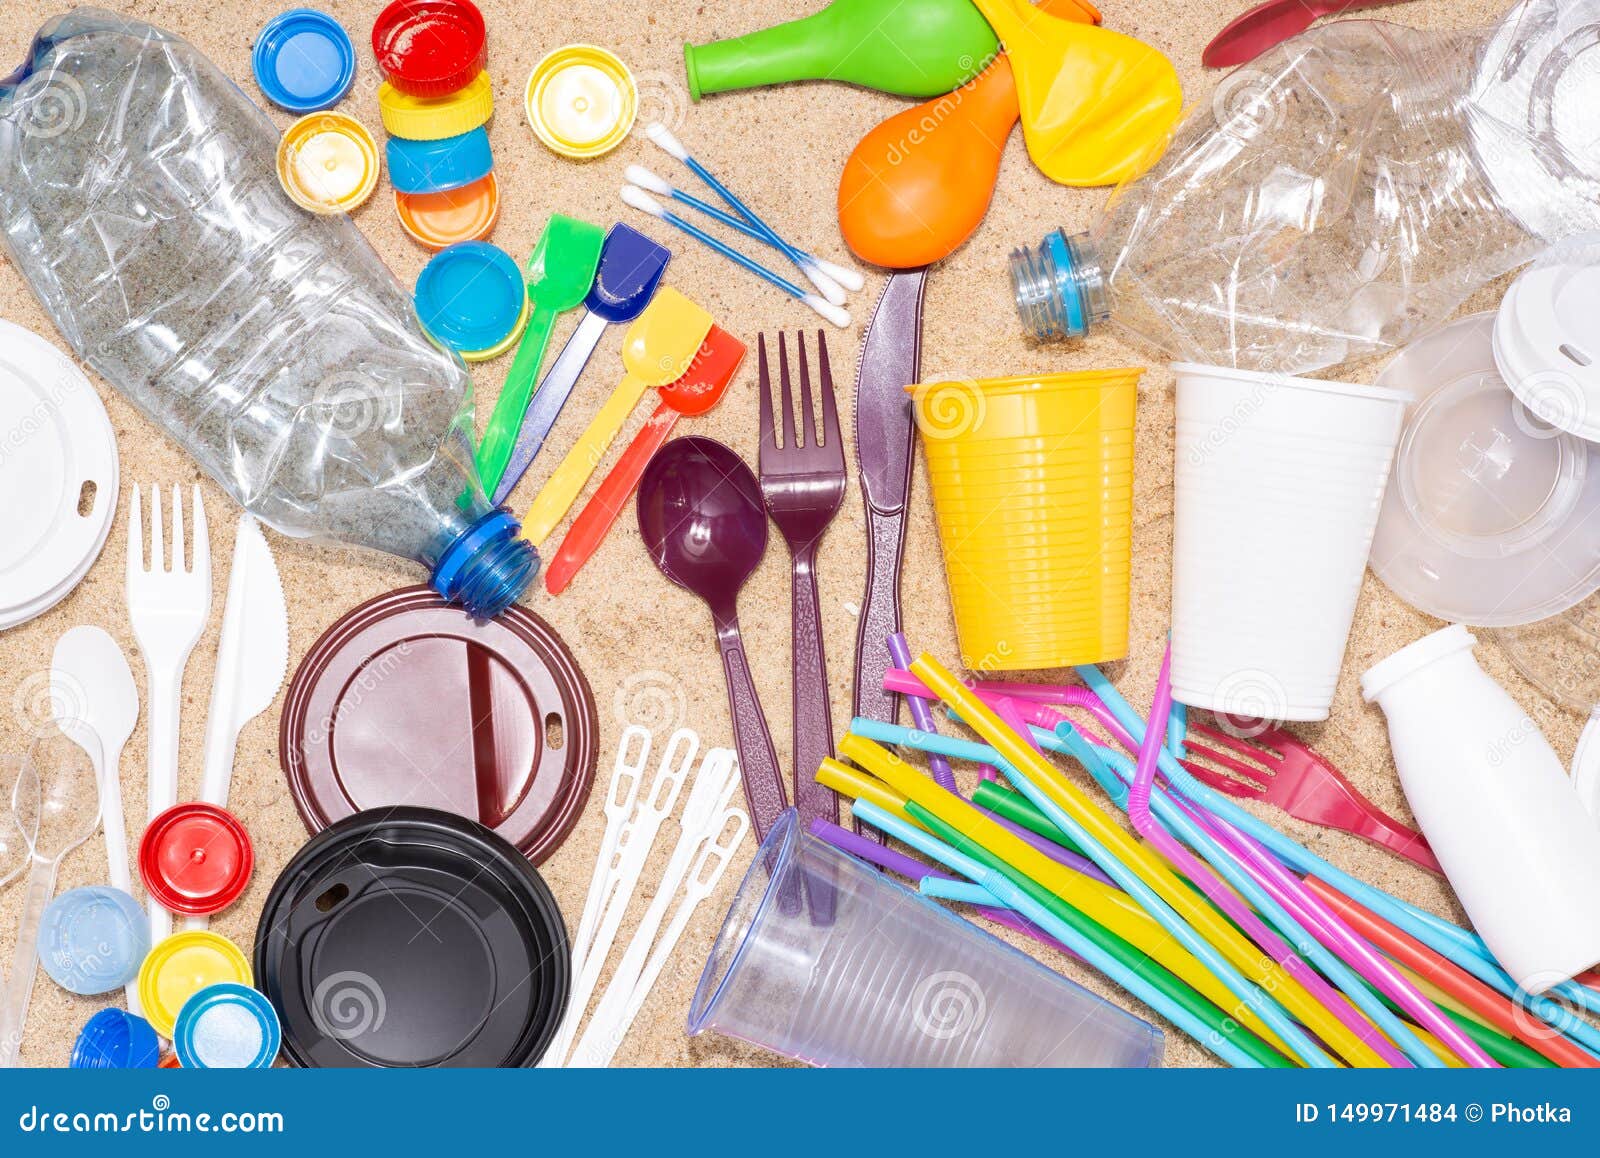 disposable single use plastic objects that cause pollution of the  environment, especially oceans